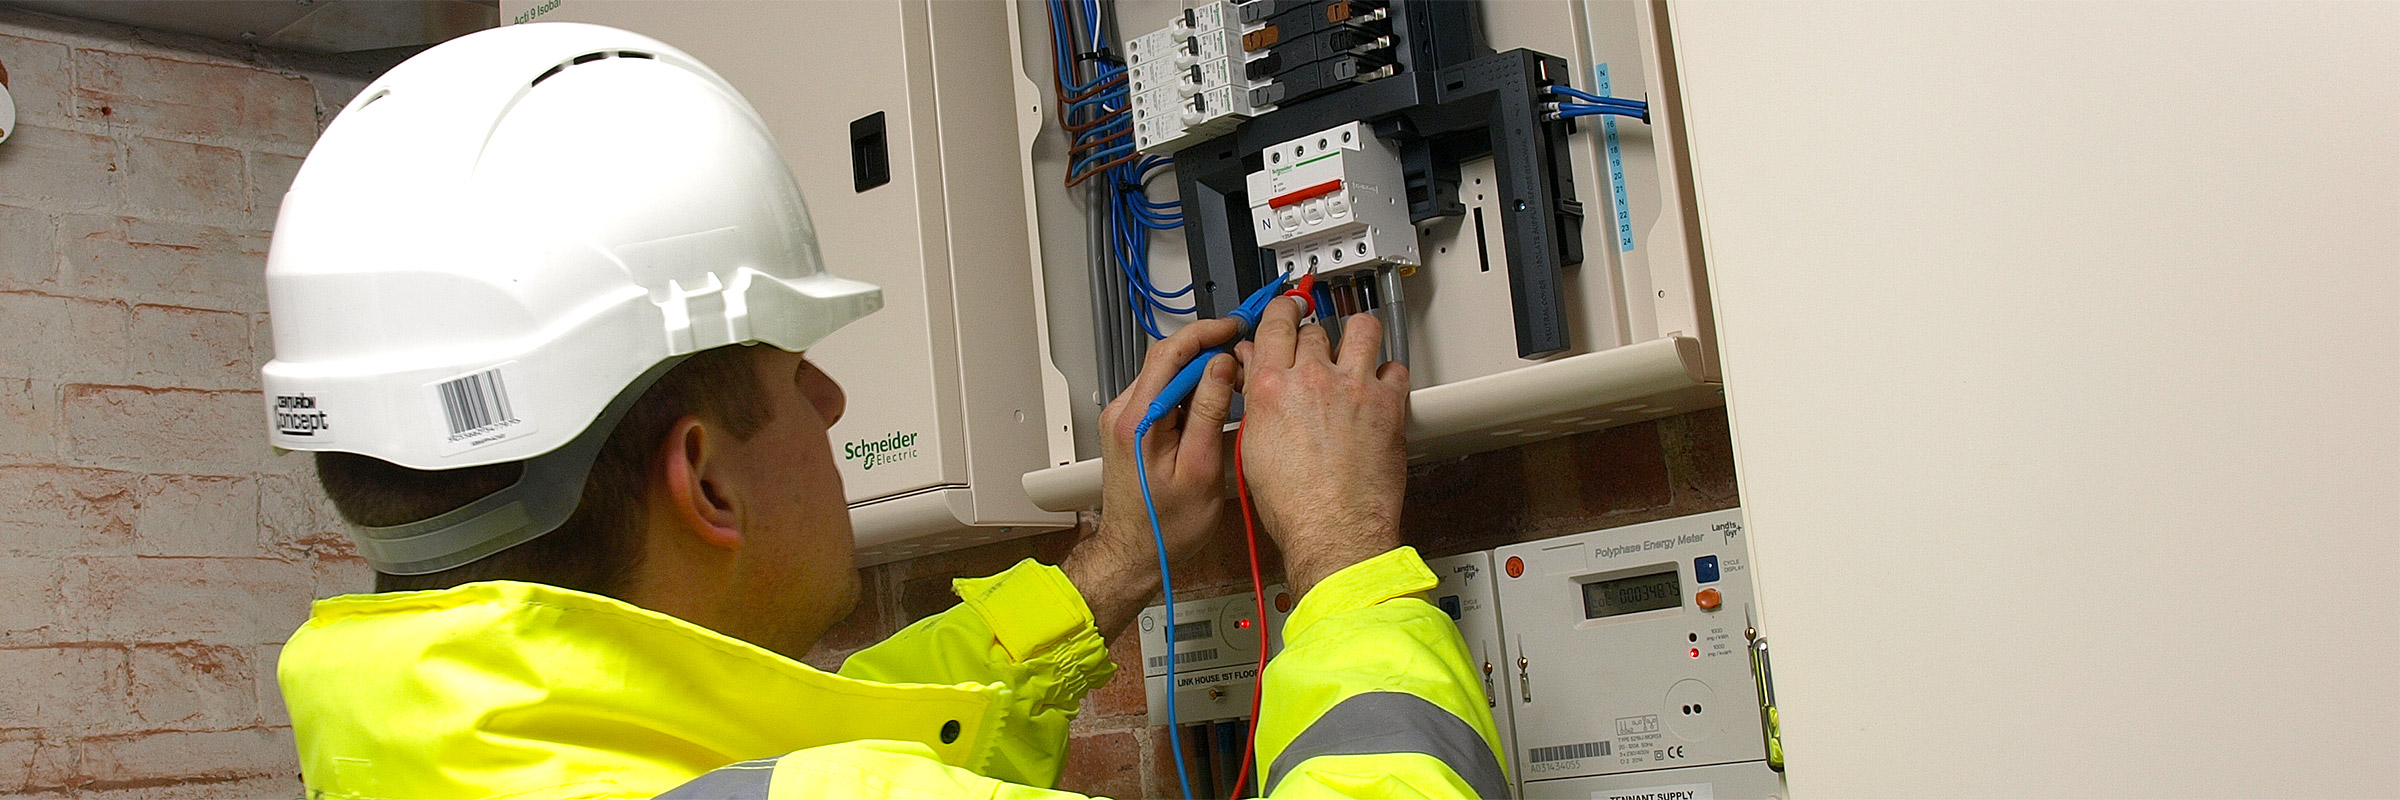 AC Webb-Electrical-Testing-Inspection-Load Analysis-PAT-Suffolk-East Anglia